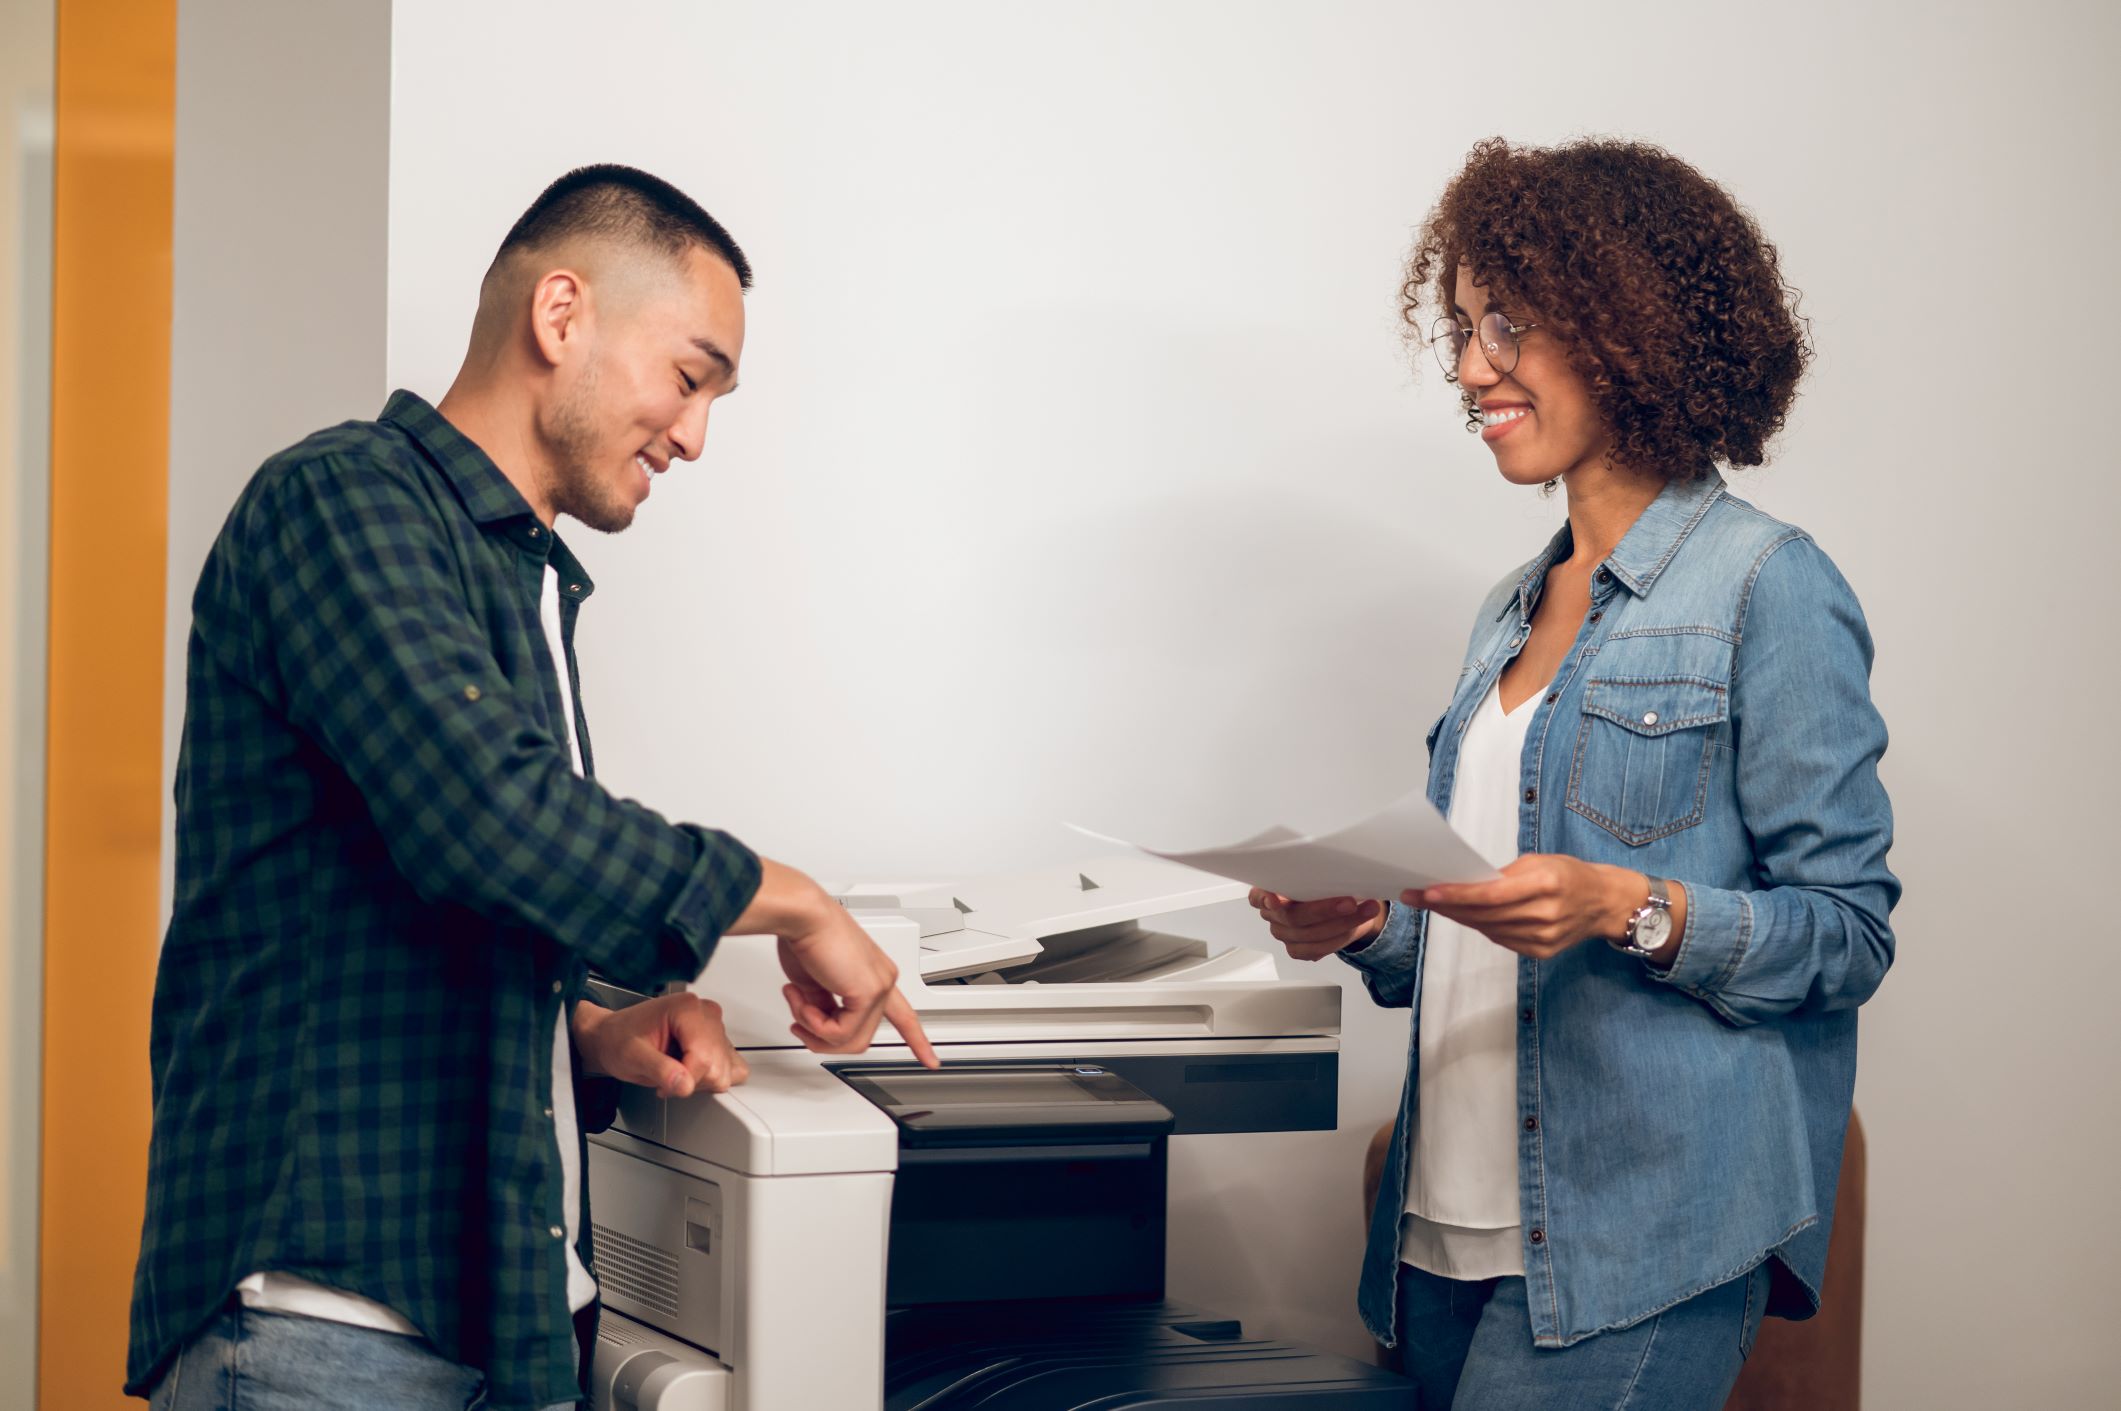 A smiling man and woman interacting in an office setting, with the man using an office copier while the woman reviews a printed document.